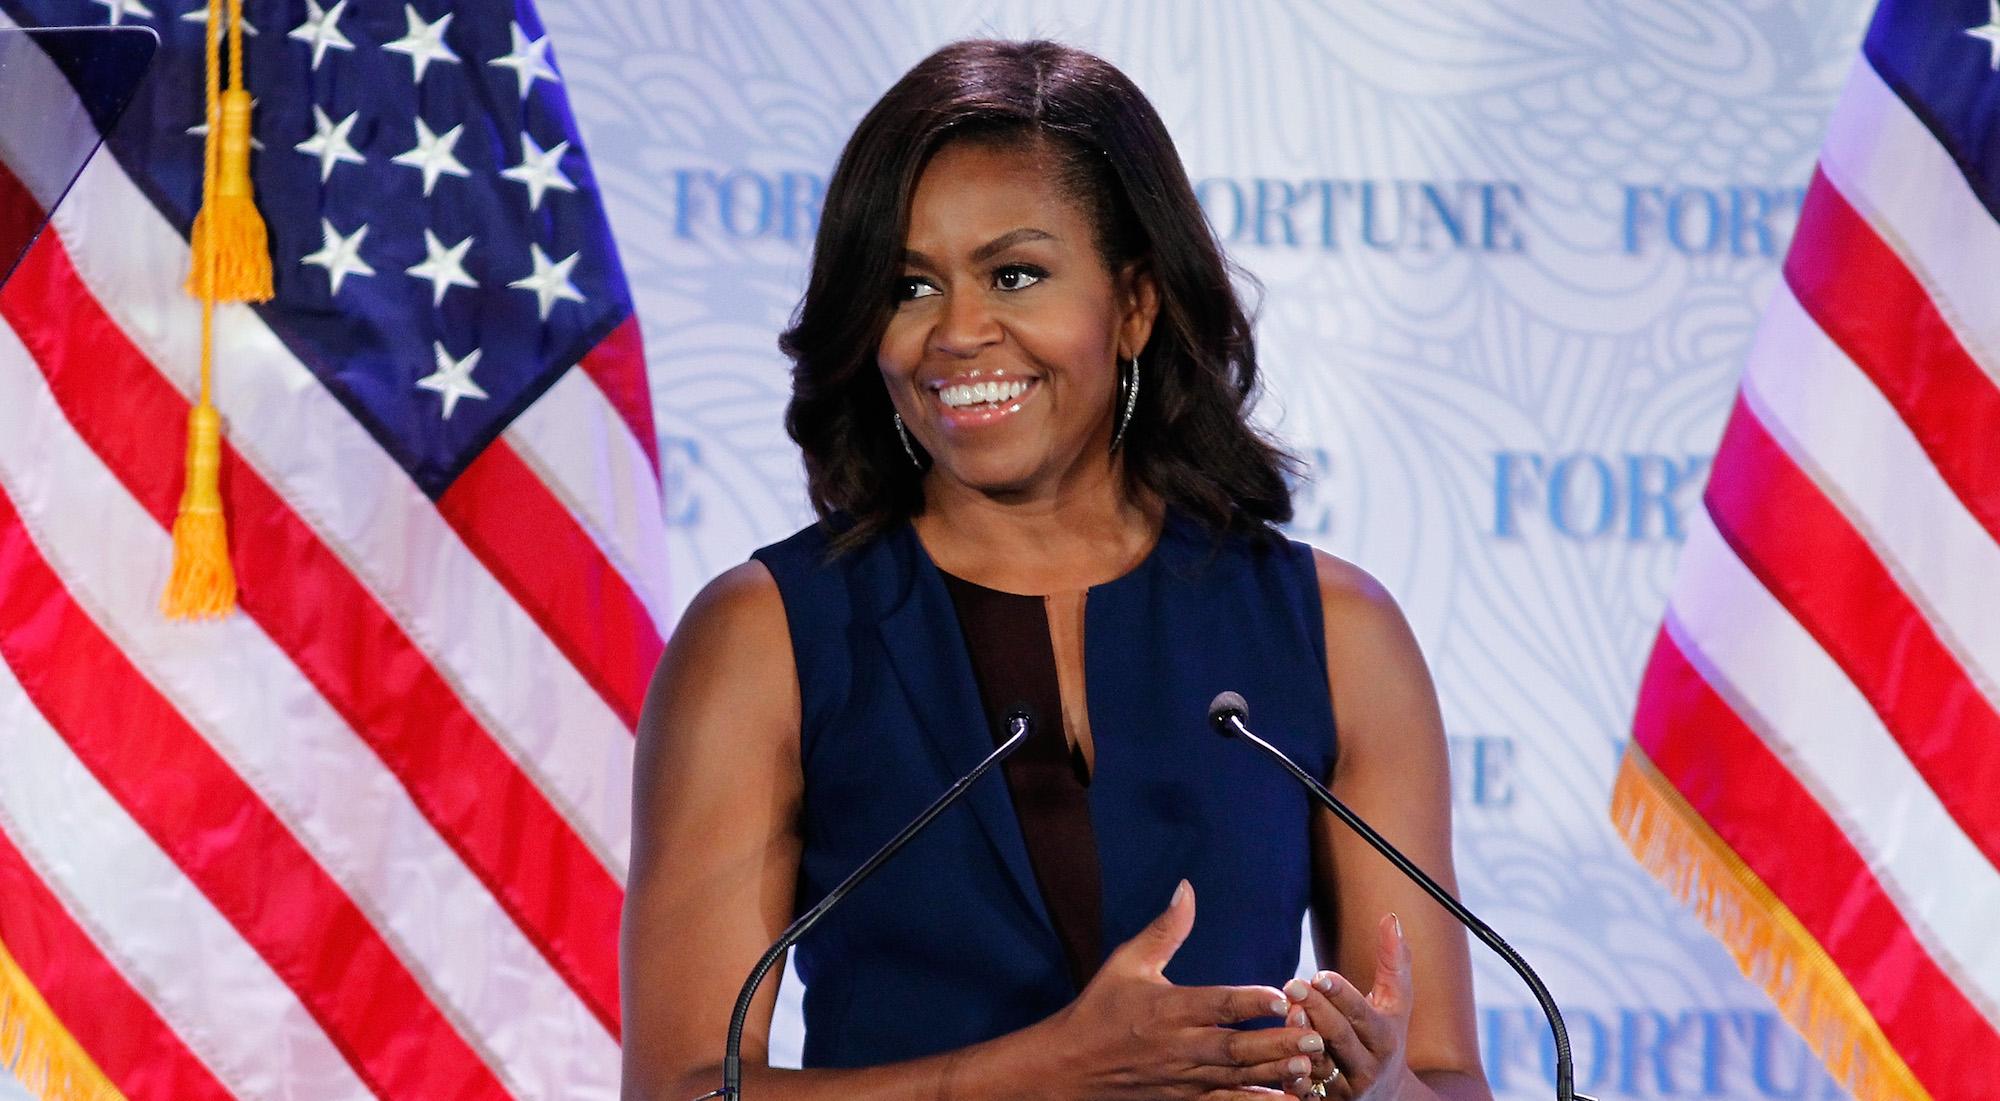 First Lady Michelle Obama speaks onstage during Fortune's Most Powerful Women Summit on October 13, 2015 in Washington DC.